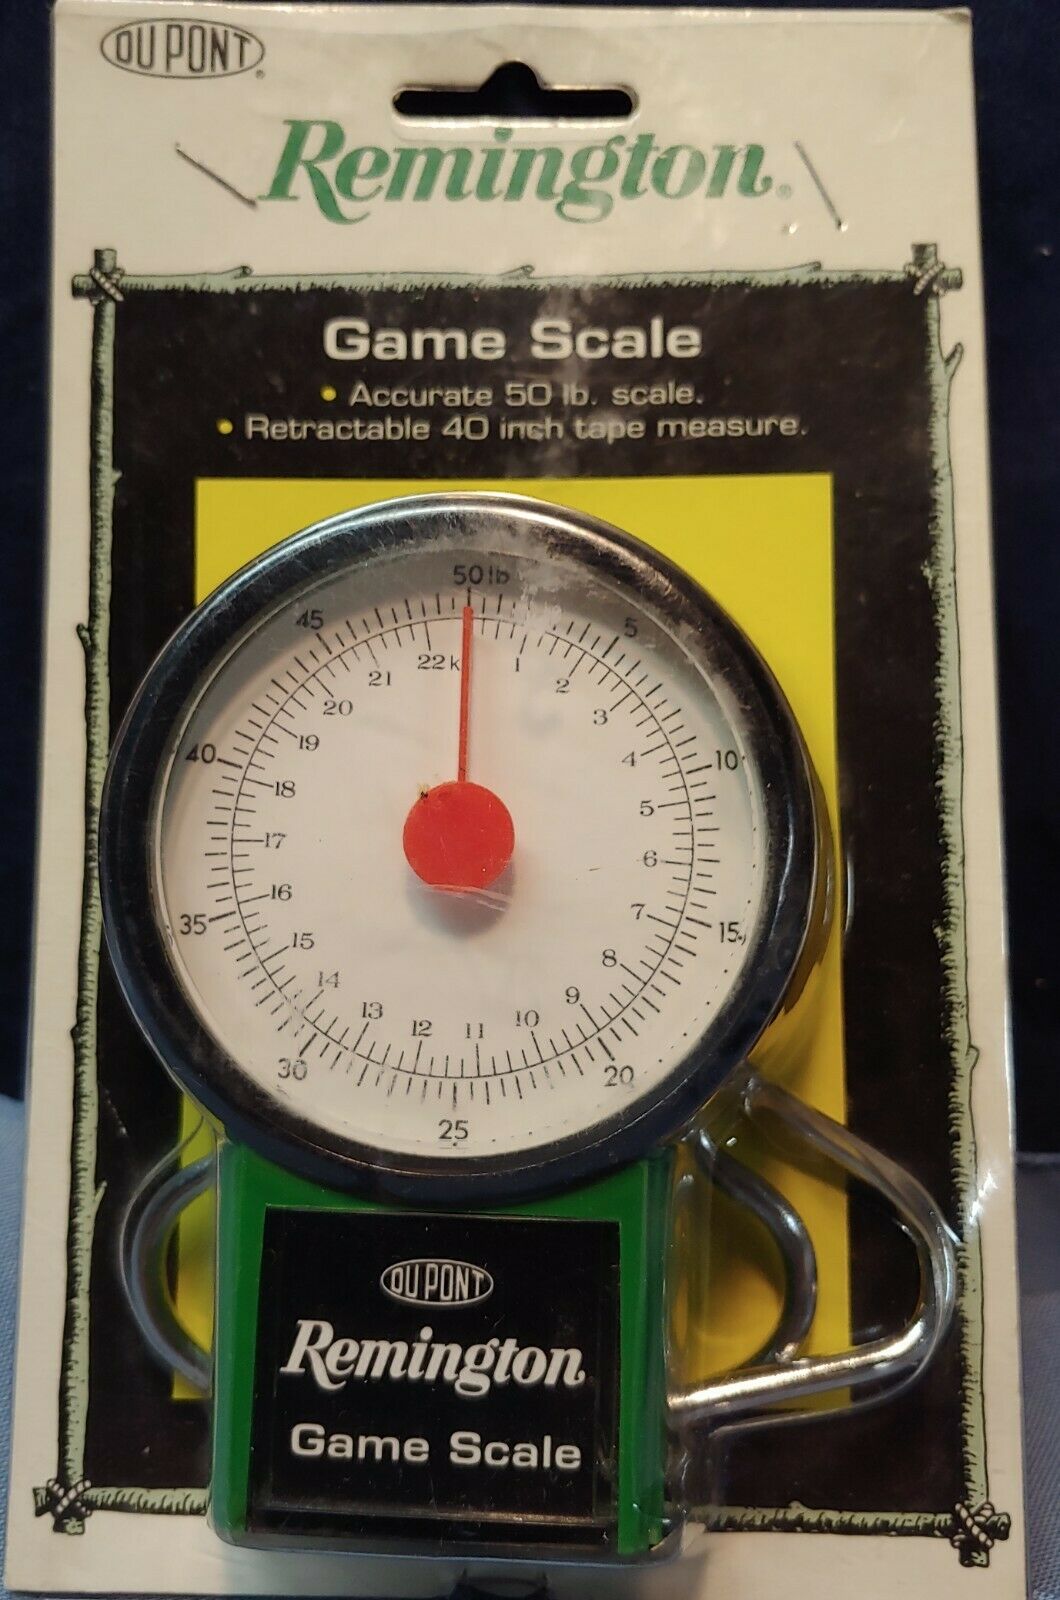 Dupont Remington Small Game Scale In Package With Tape Measure.